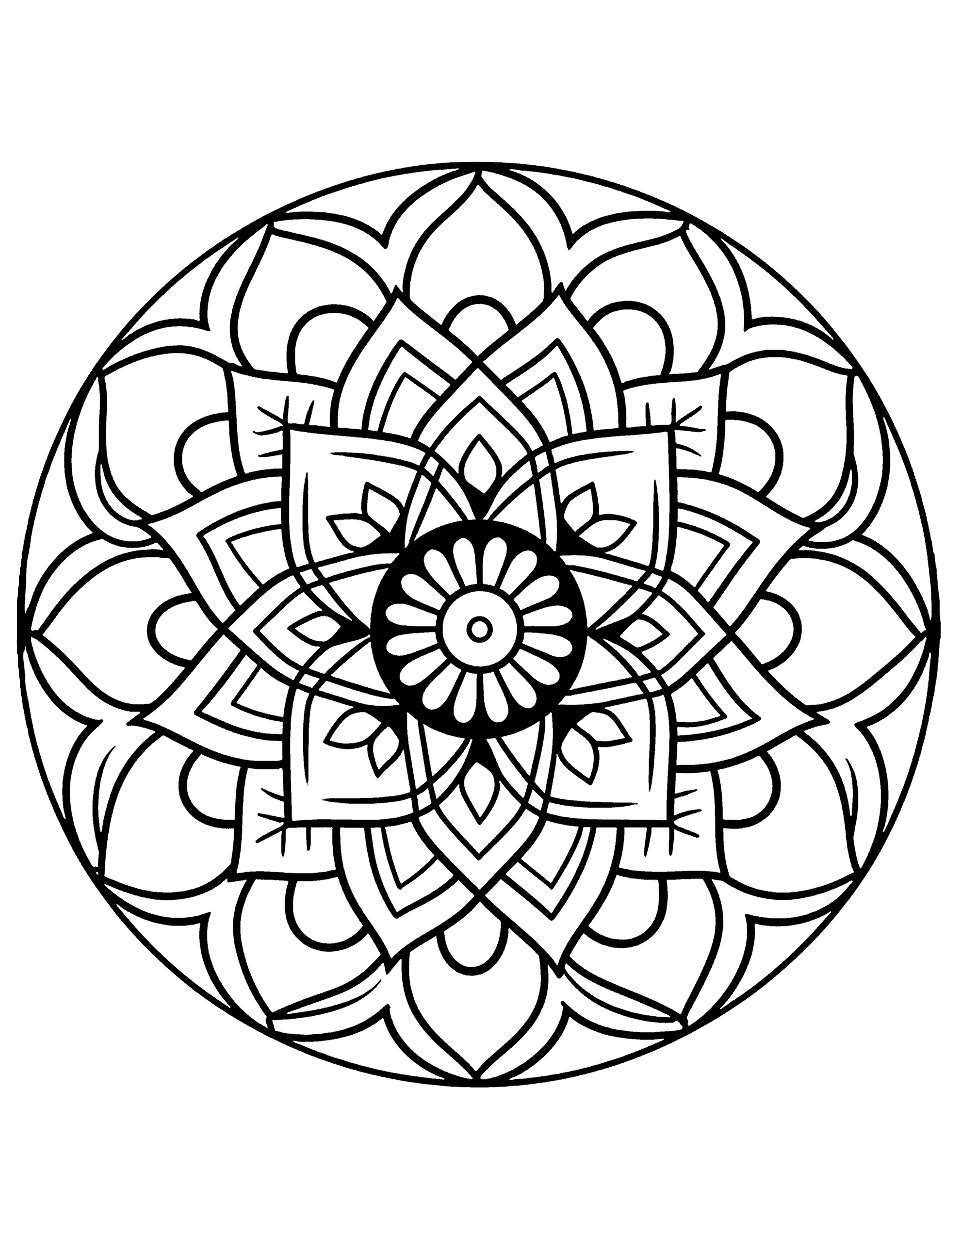 Mandala Art Adventure Coloring Page - An advanced mandala filled with various flower petal shapes radiating outwards.